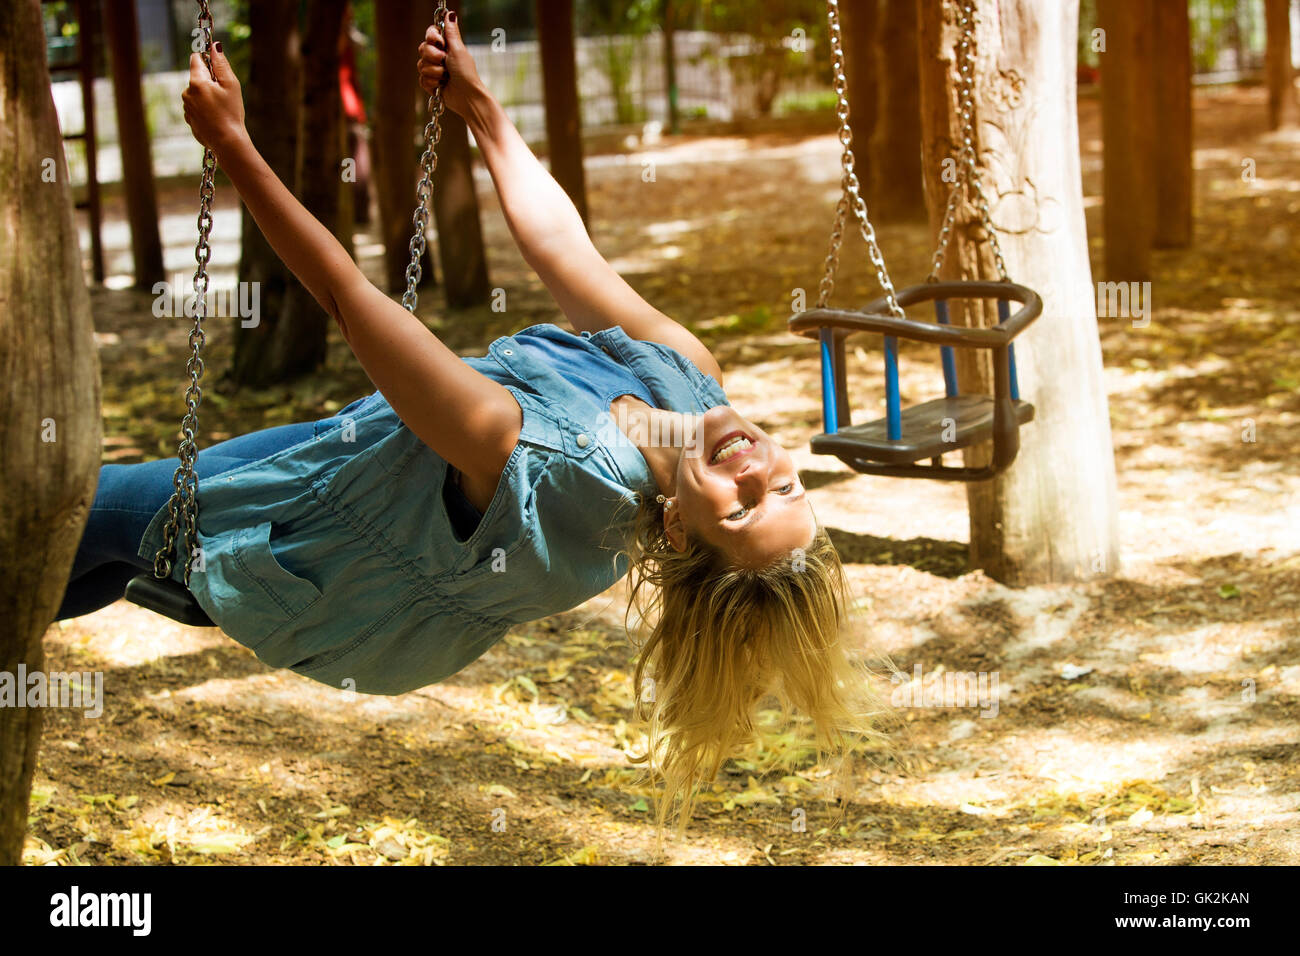 blond woman sitting carefree and happy on a swing Stock Photo